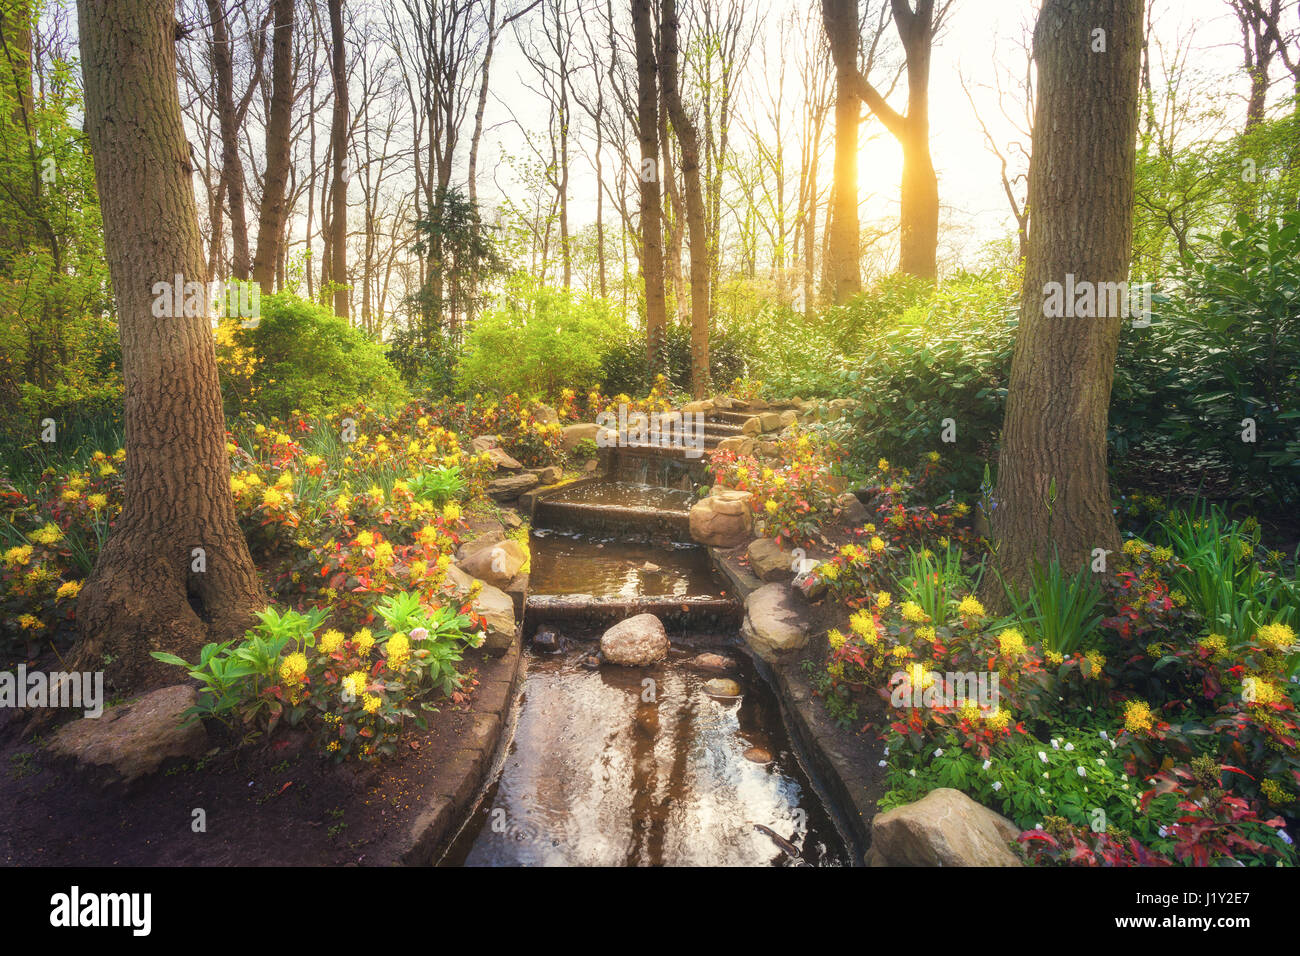 Blooming spring park with water cascade in famous Keukenhof park, Netherlands. Beautiful landscape with colorful flowers, trees with green leaves Stock Photo